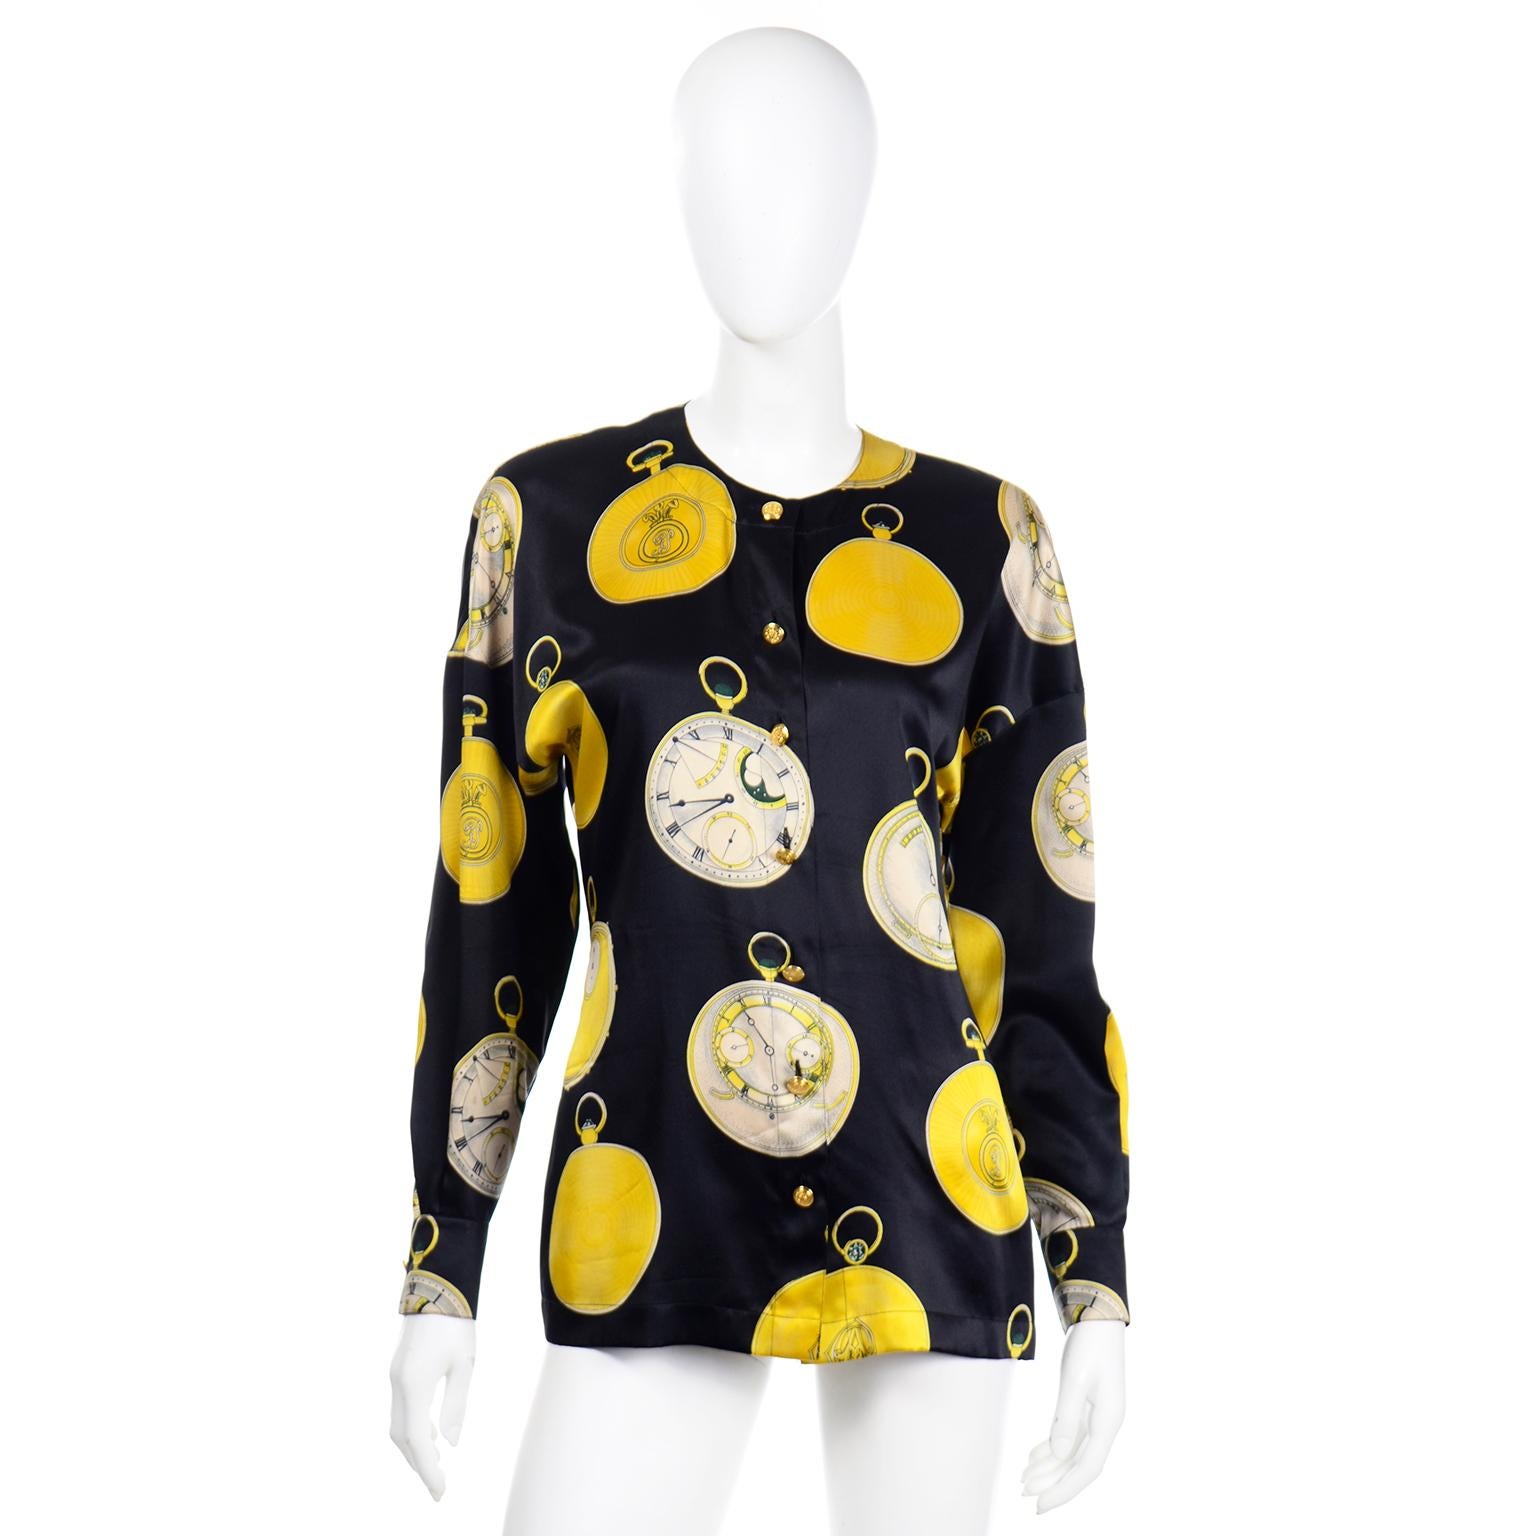 This is a really fun vintage Escada novelty clock print silk blouse that is deadstock, with its original tags still attached!  The fabric is a midnight blue with bright yellow and blue/grey details on the oversized clocks. There are beautiful